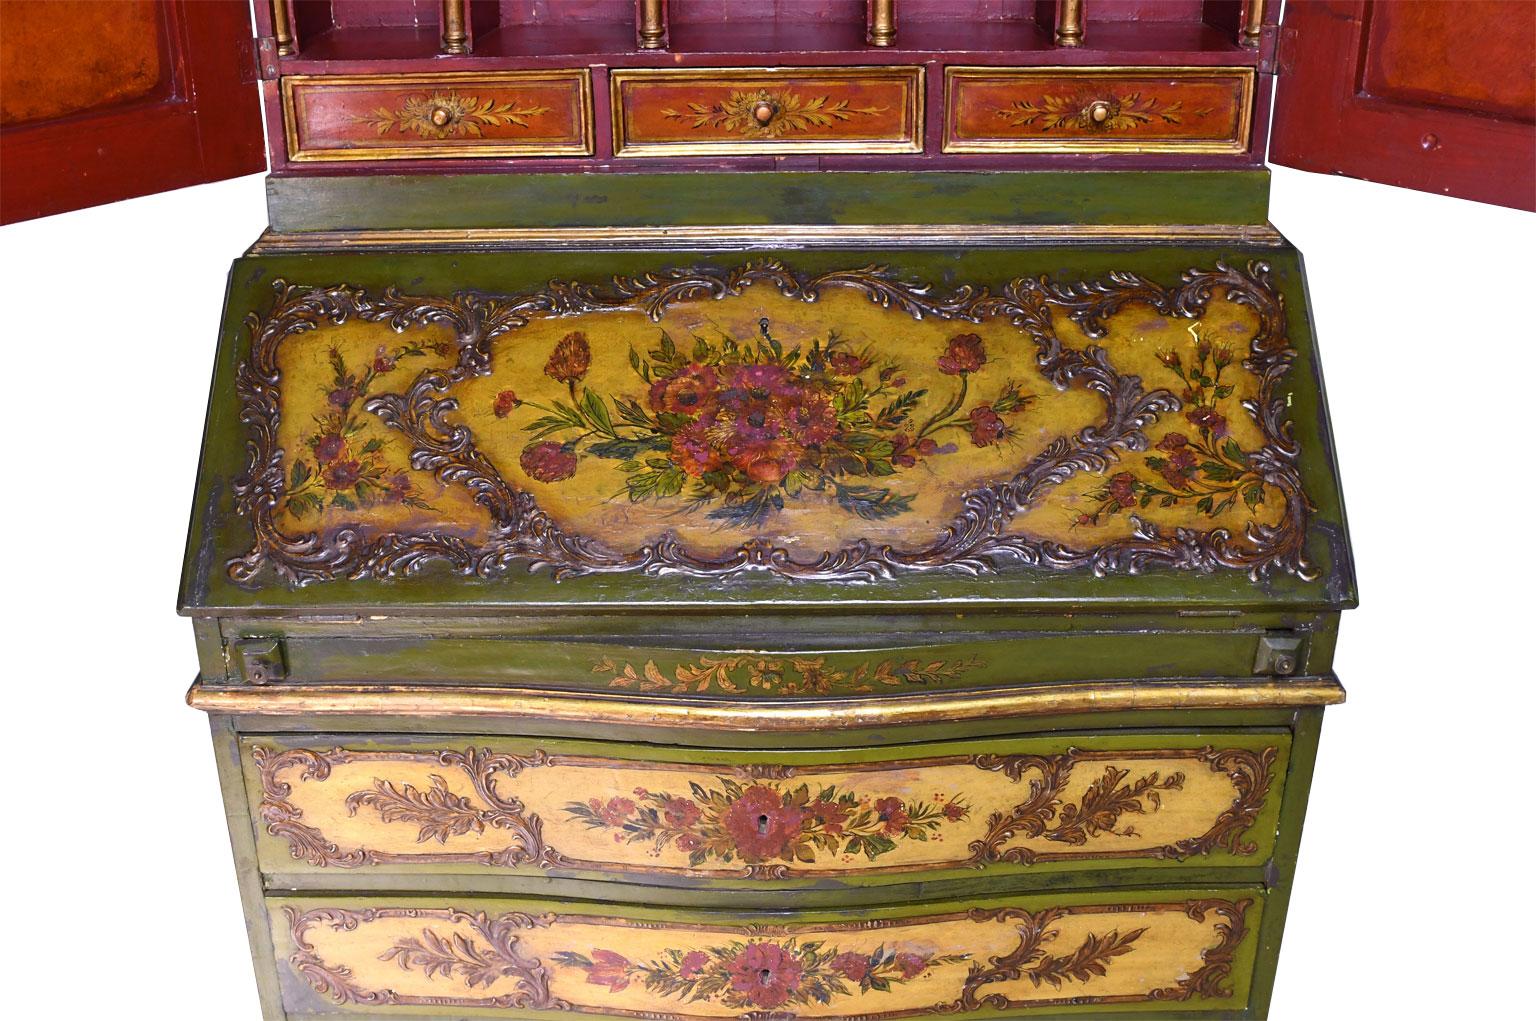 Italian 19th Century Venetian Secretary Bookcase with Painted Scenes and Floral Sprays For Sale